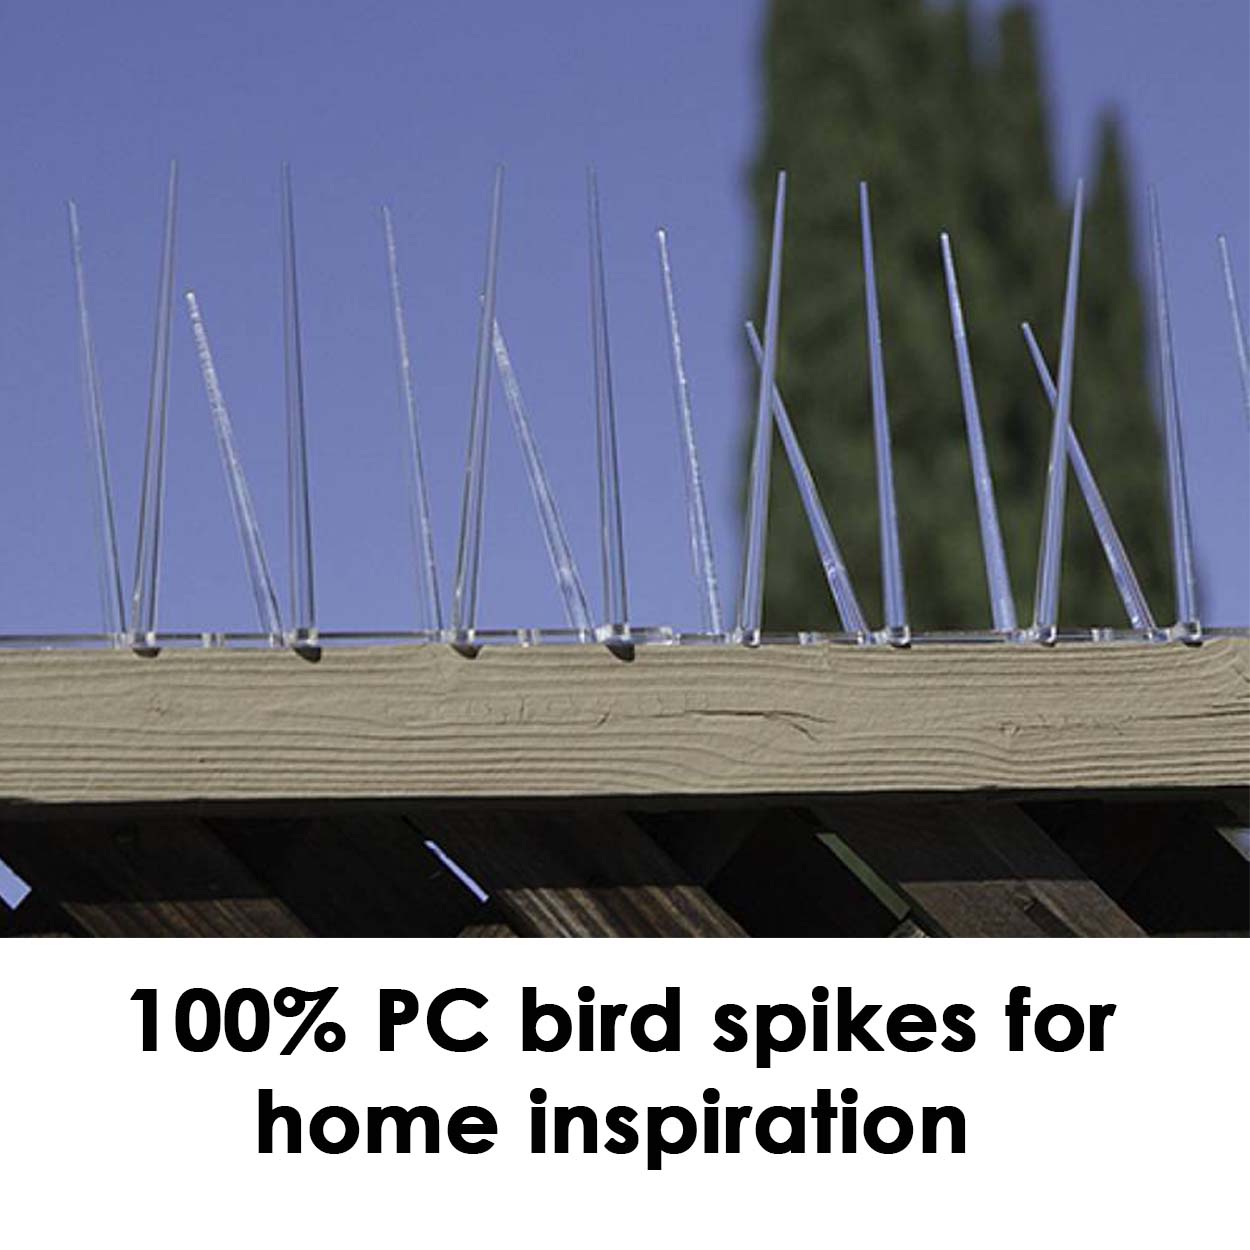 100% PC bird spikes for home inspiration